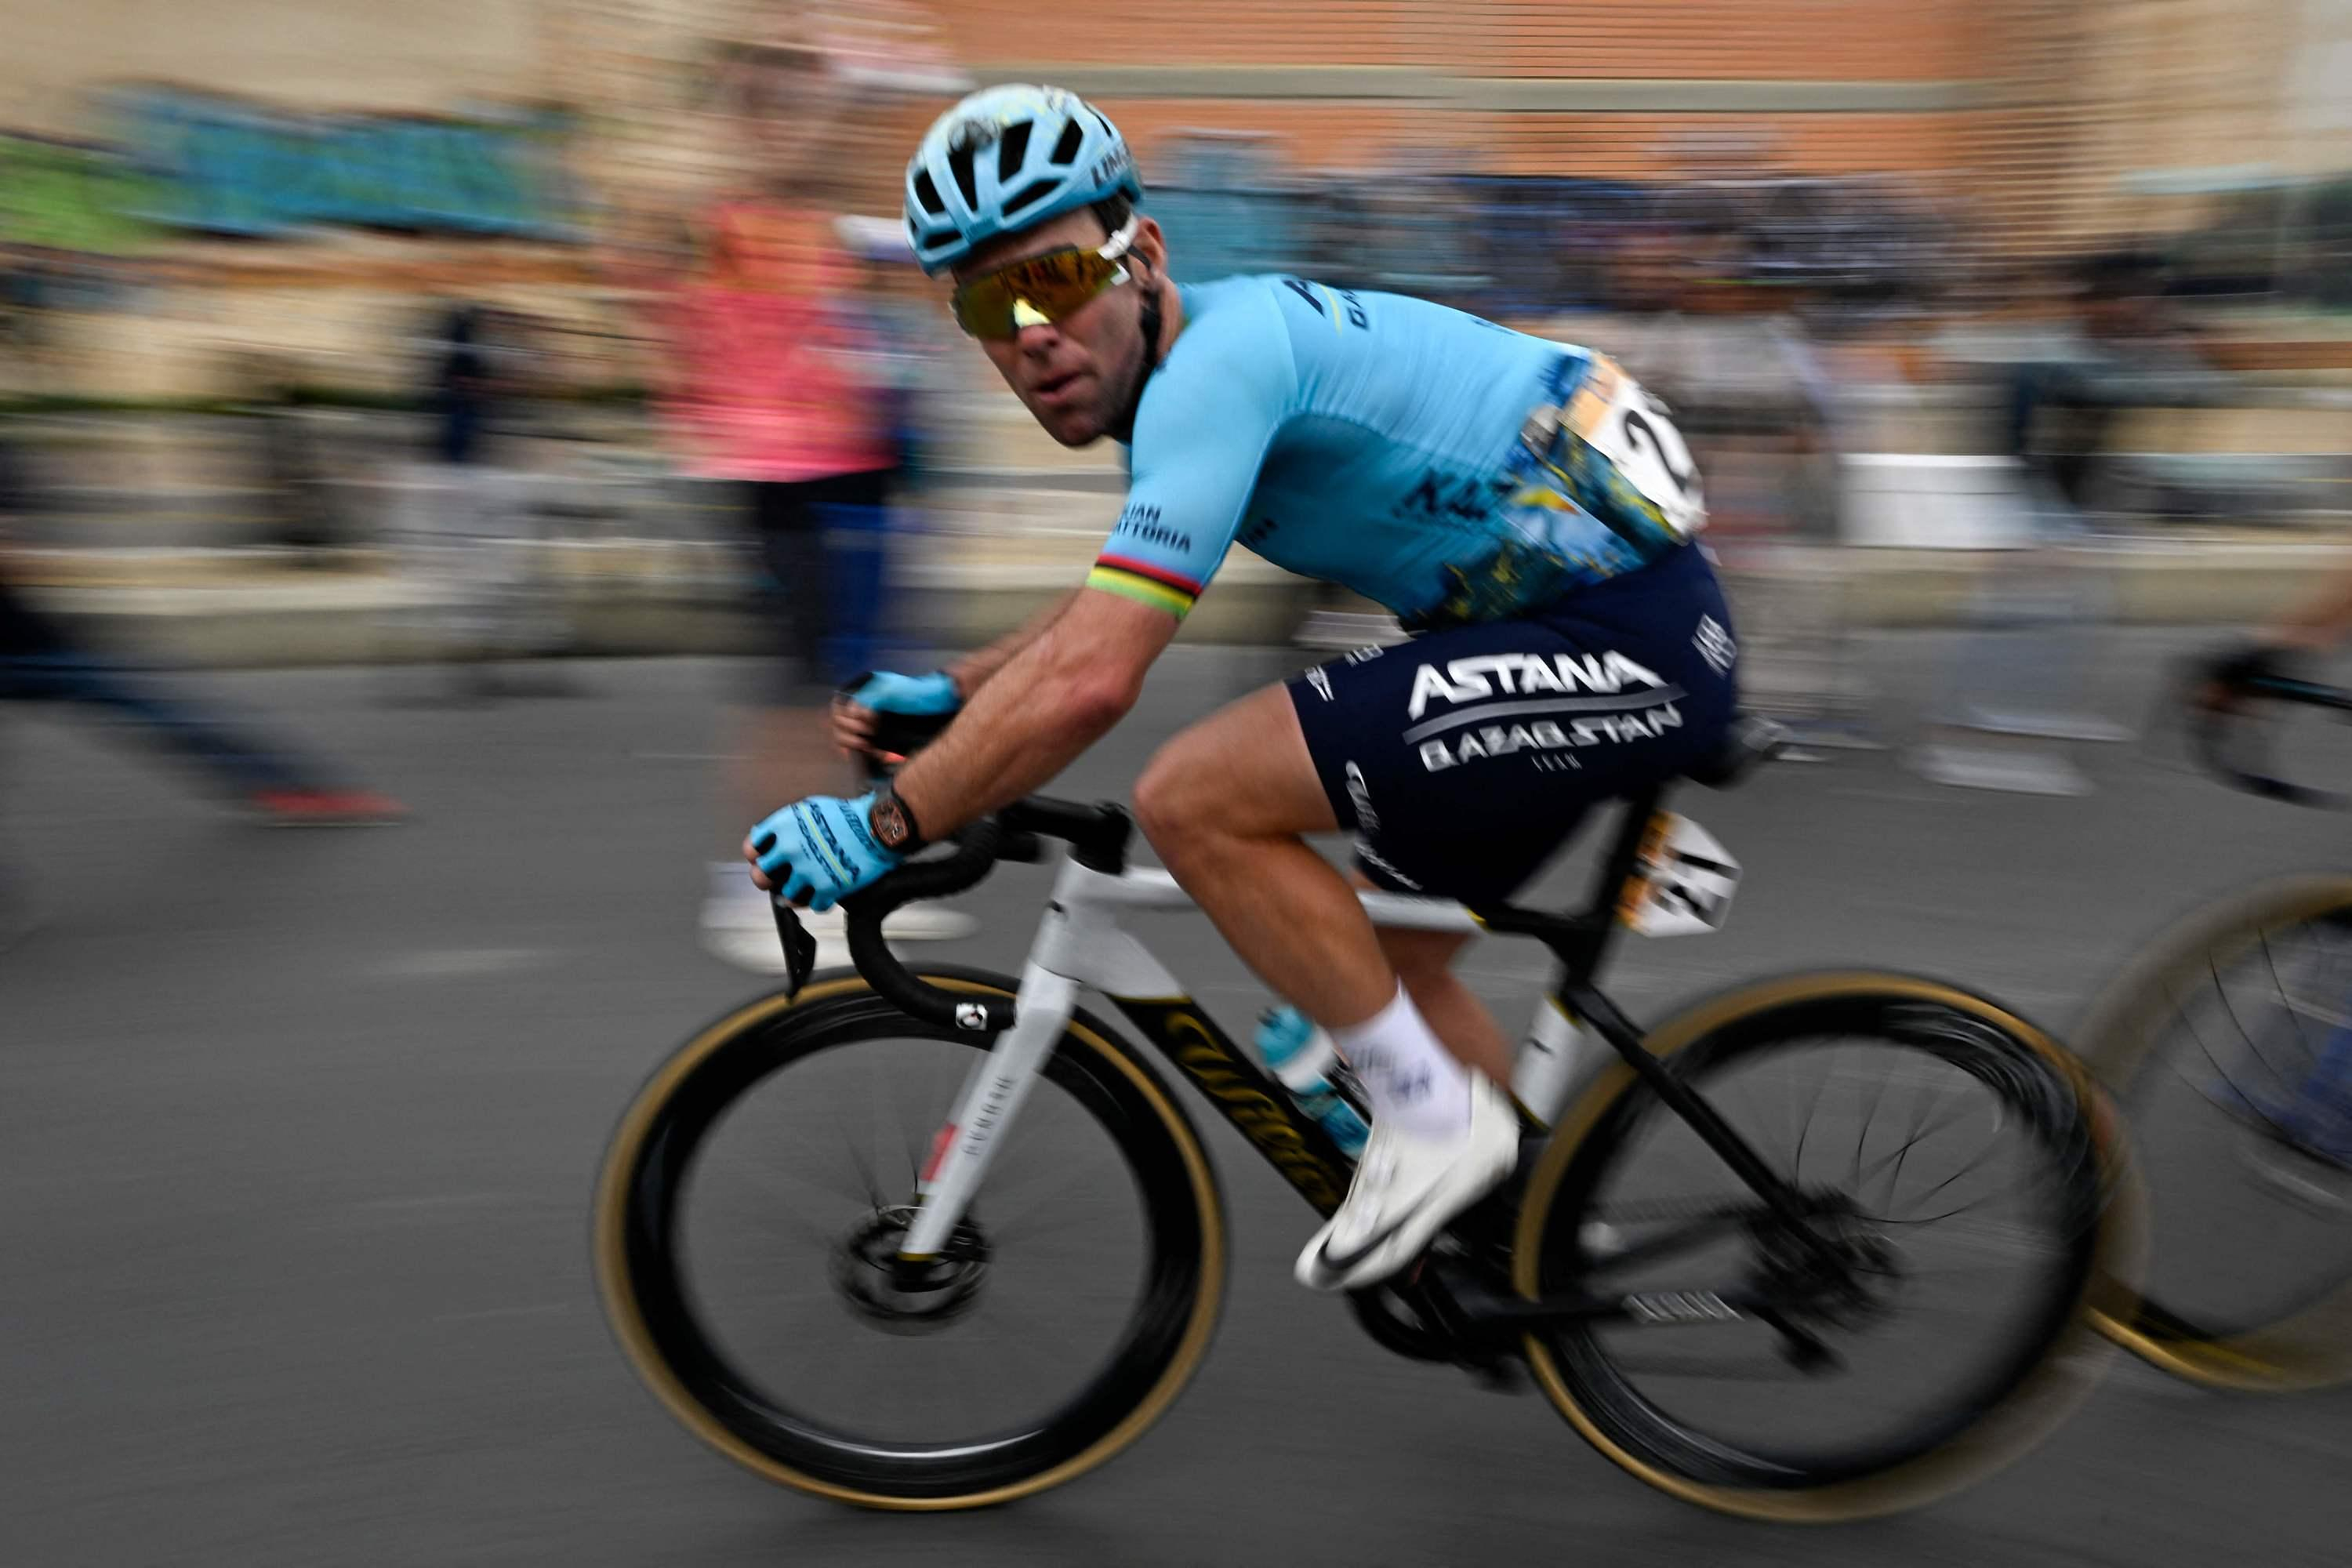 Cycling: Mark Cavendish wins the 4th stage of the Tour of Colombia